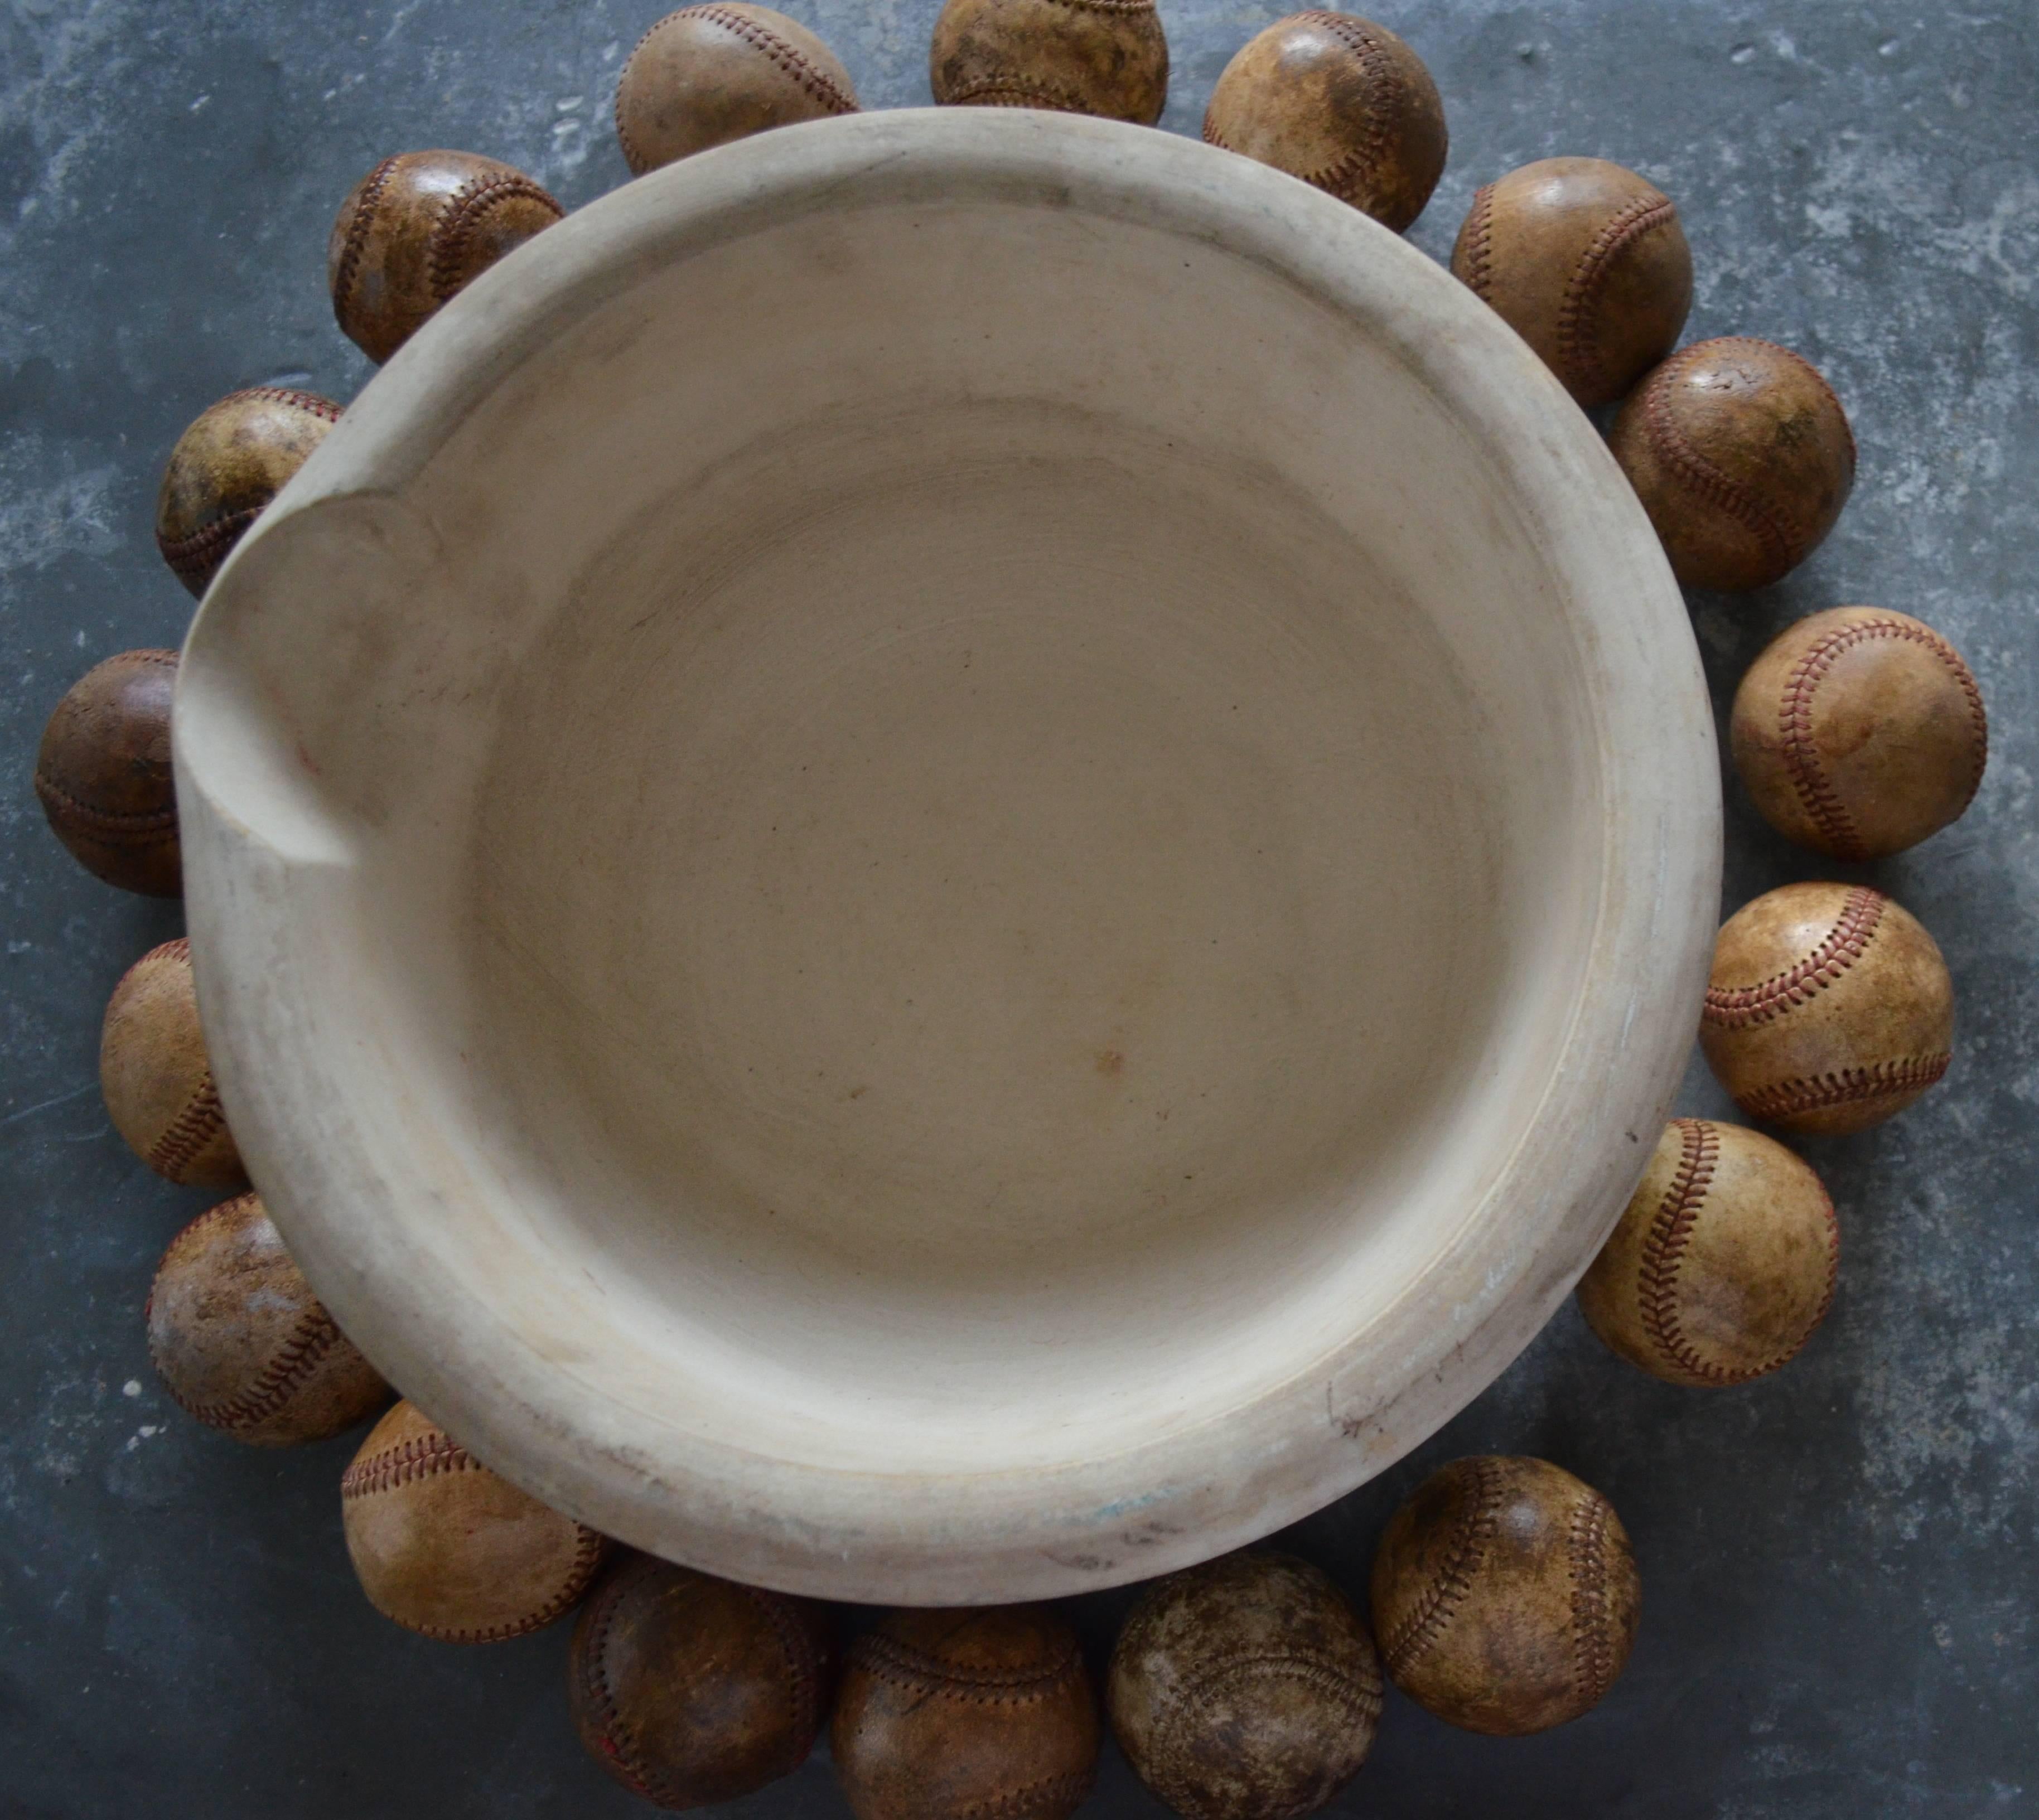 Mortar Bowl of Antique Stone with Display of Well-Worn Baseballs 1